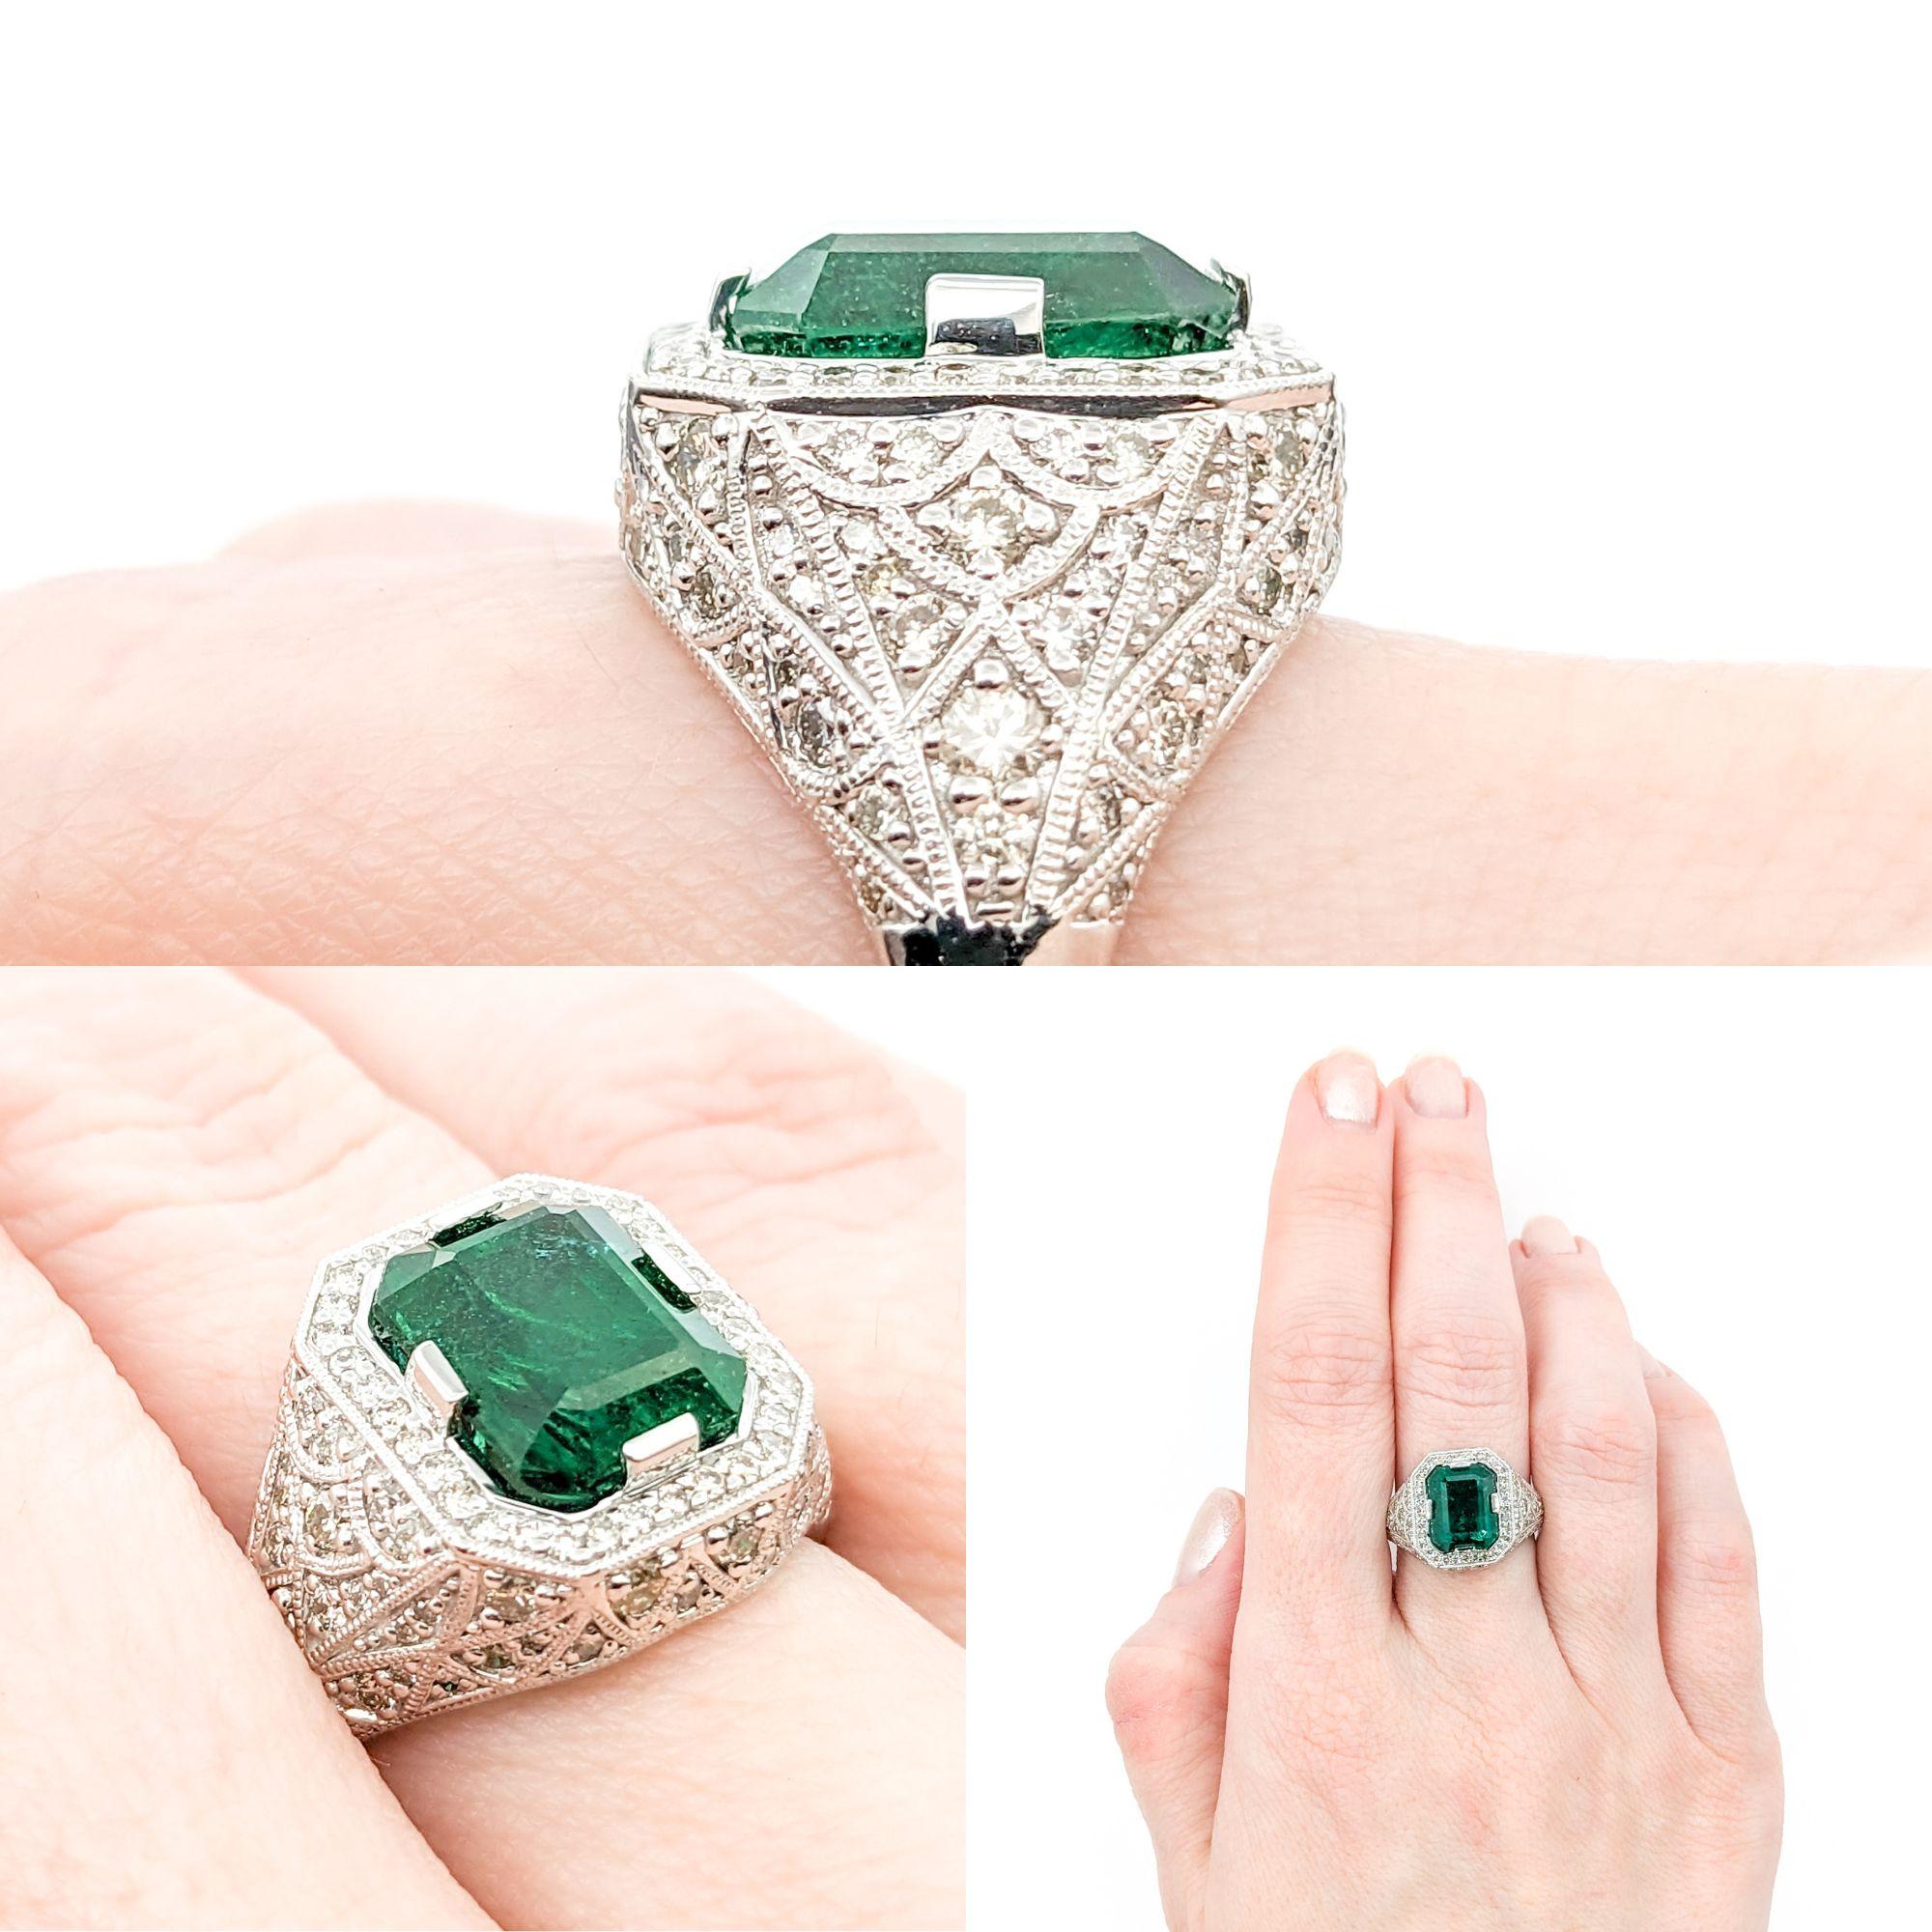 3.31ct Emerald & Diamonds Ring In Platinum

Introducing this exquisite Natural Emerald Ring crafted in elegant Platinum. This ring celebrates a stunning 3.31ct Emerald centerpiece with a captivating green color. The emerald is further enhanced by